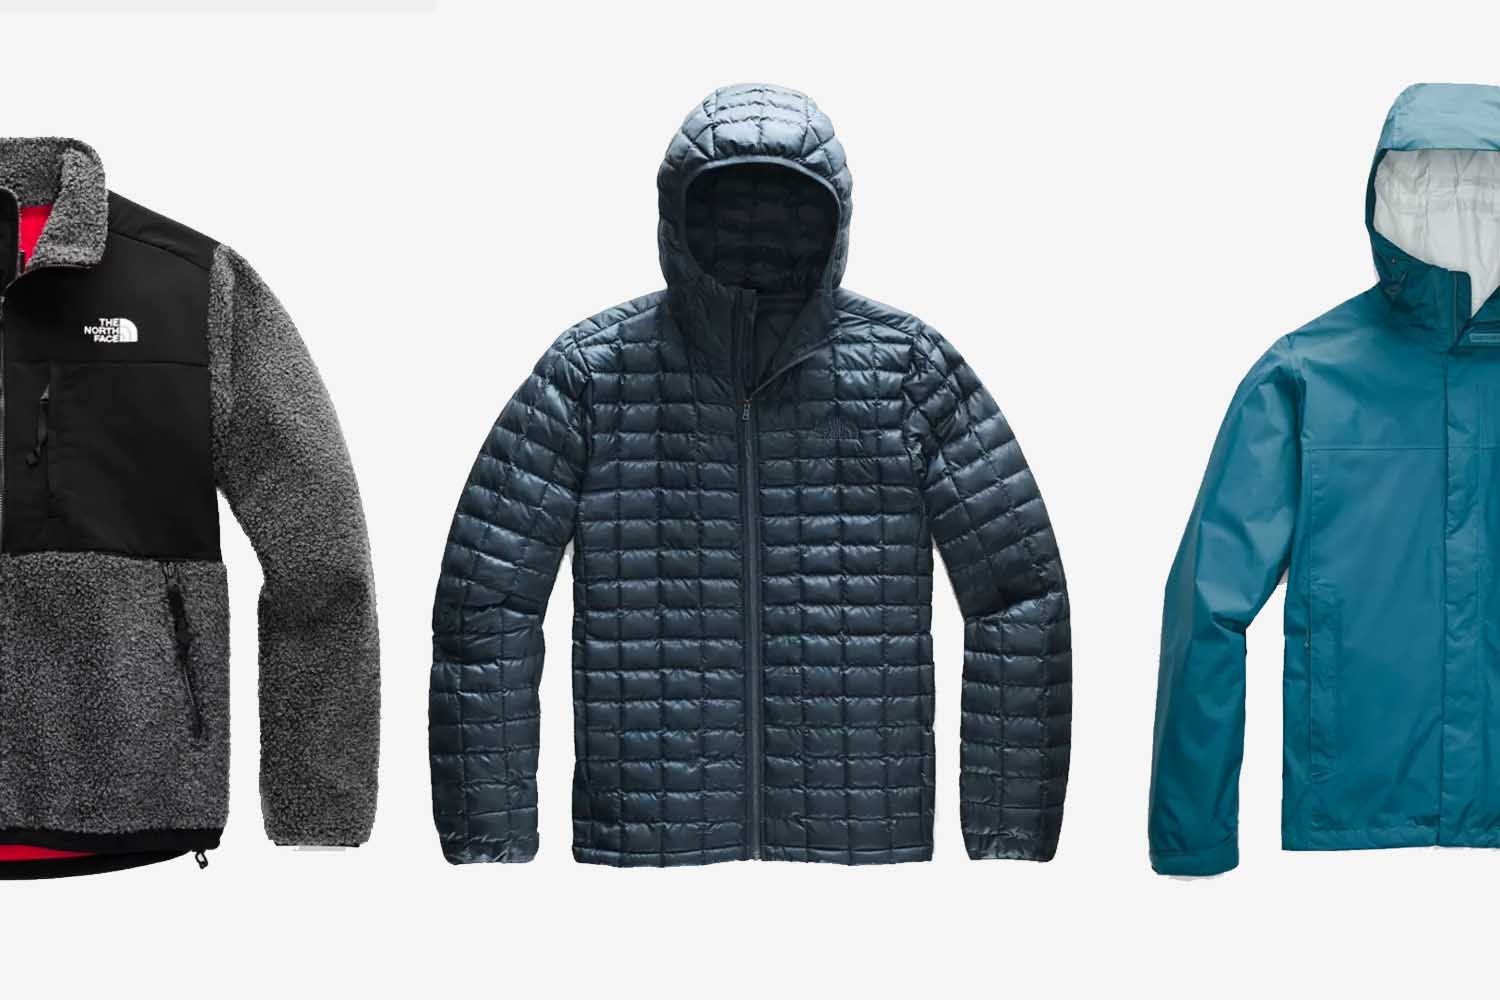 Deal: Save 30% on Some of Our Favorite North Face Jackets, Pullovers and More